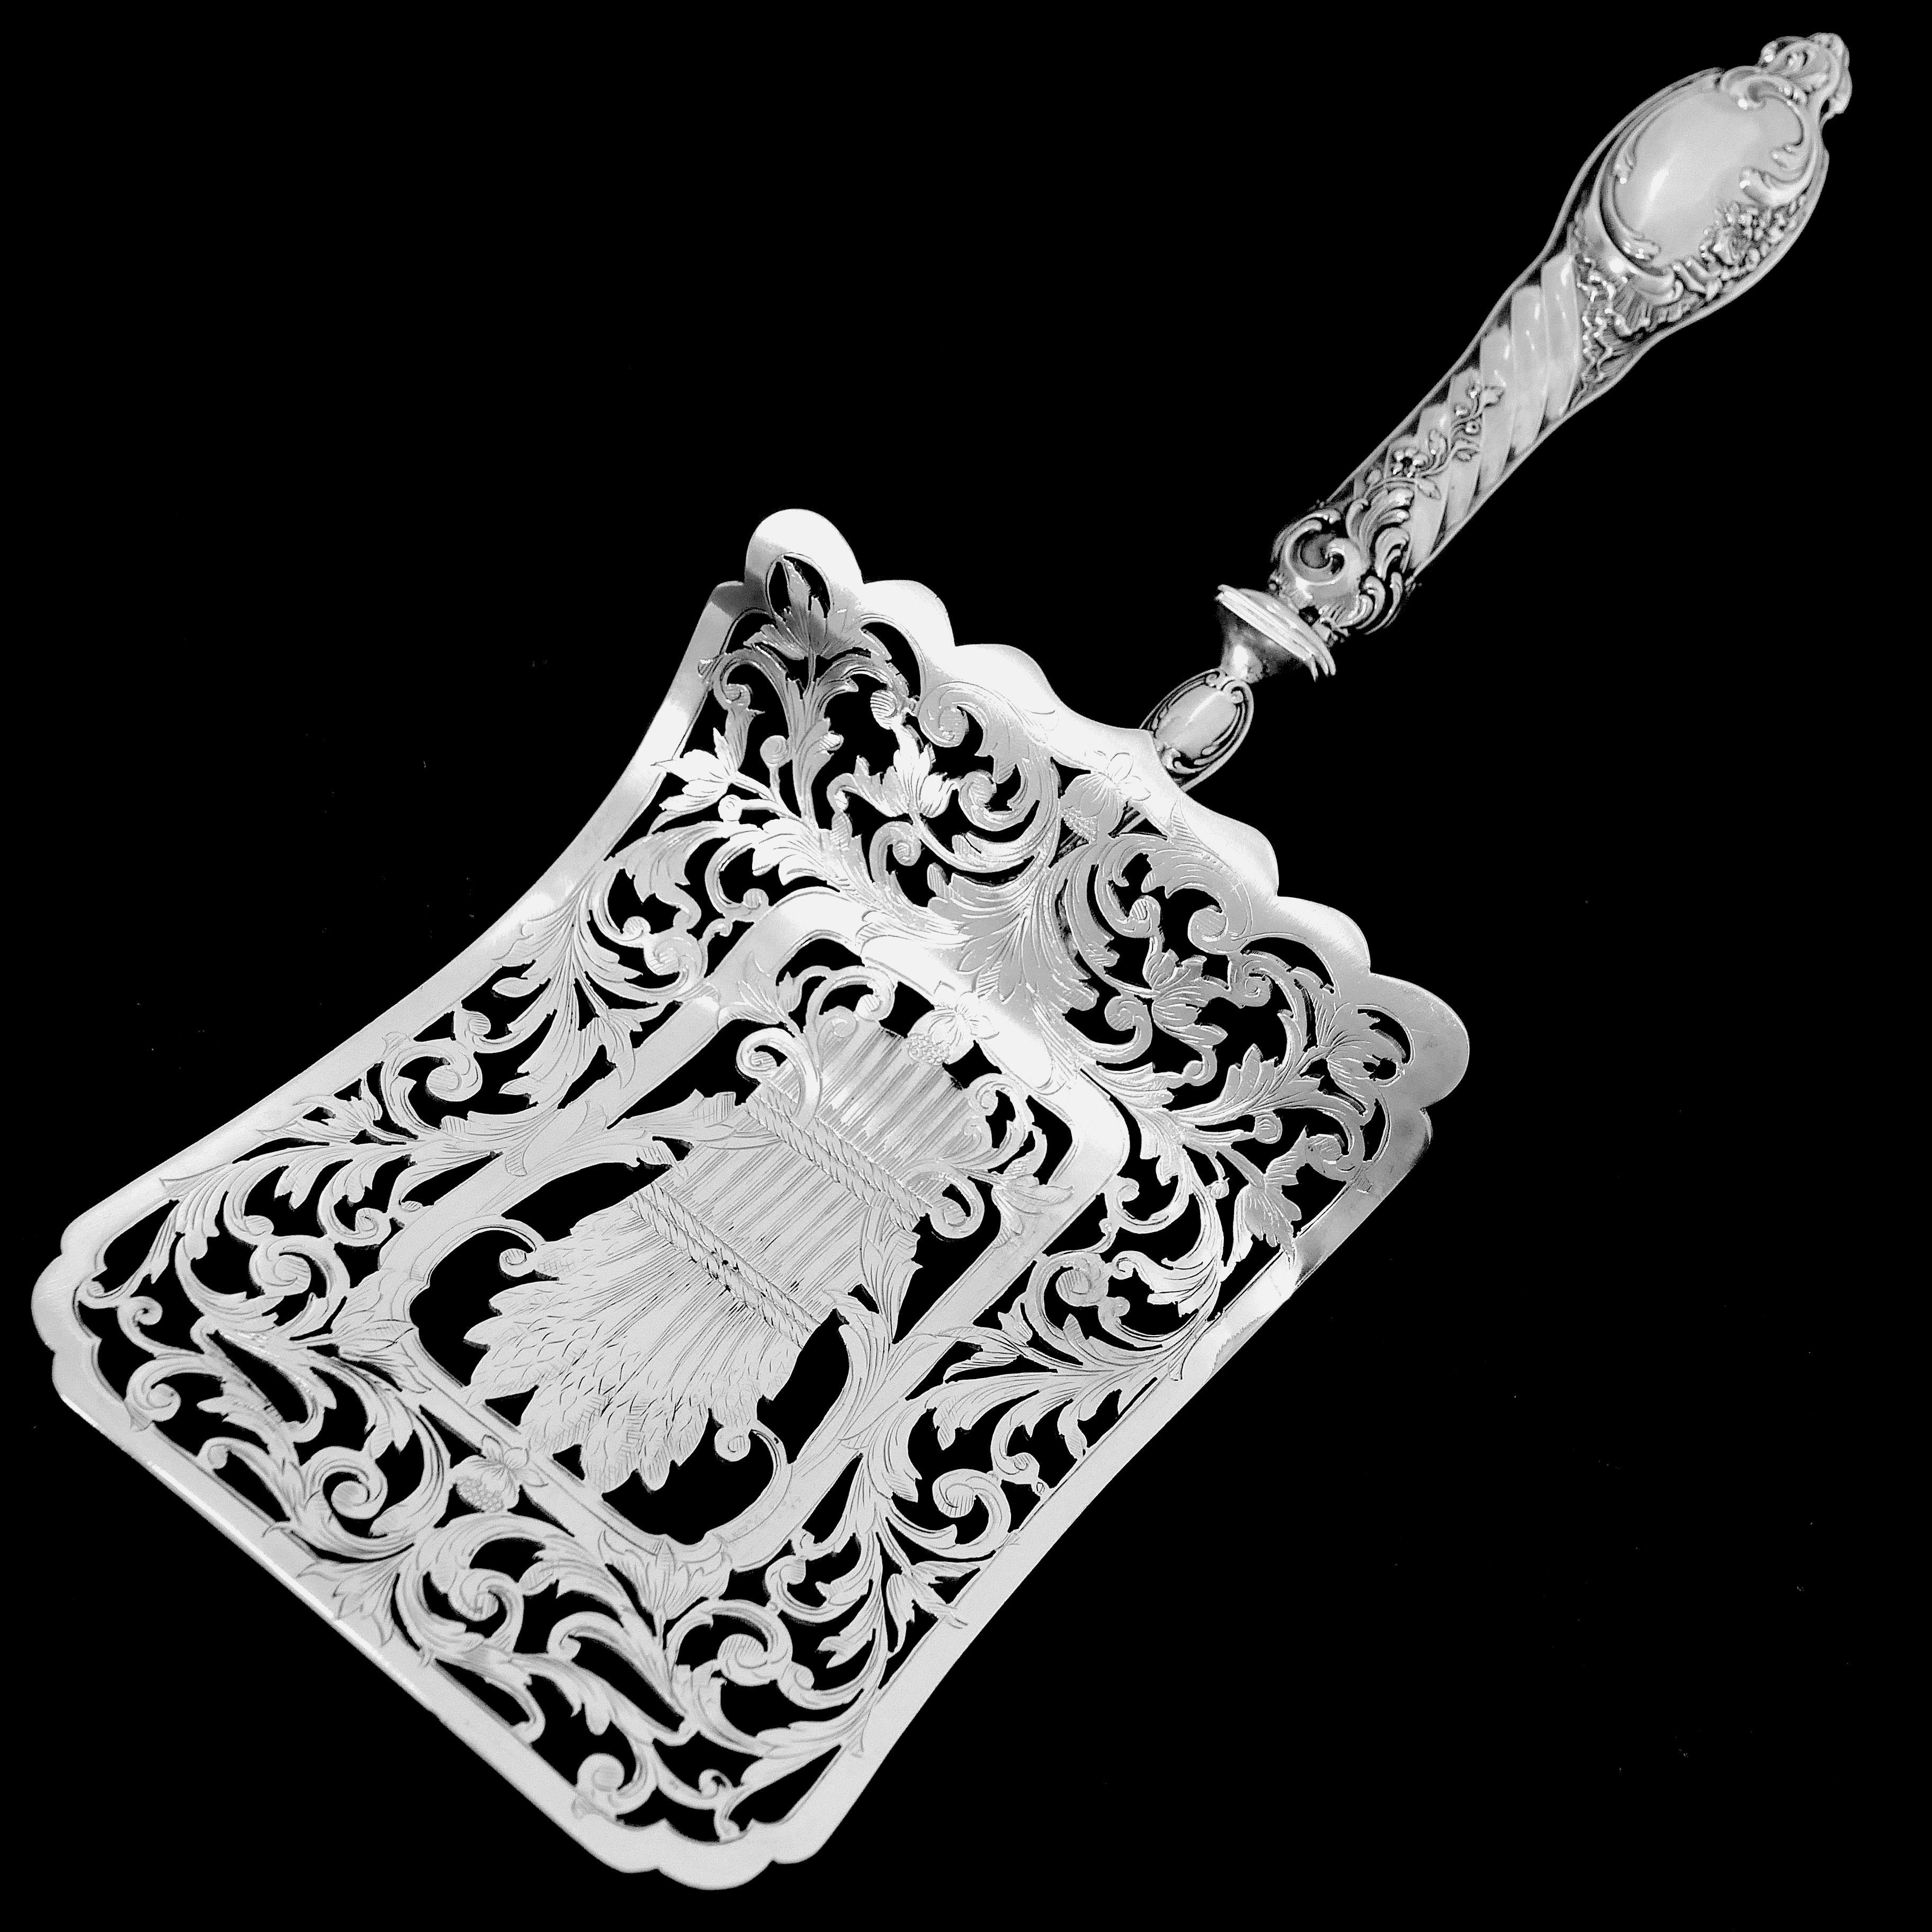 Puiforcat Rare French Sterling Silver Asparagus Pastry Toast Server 2